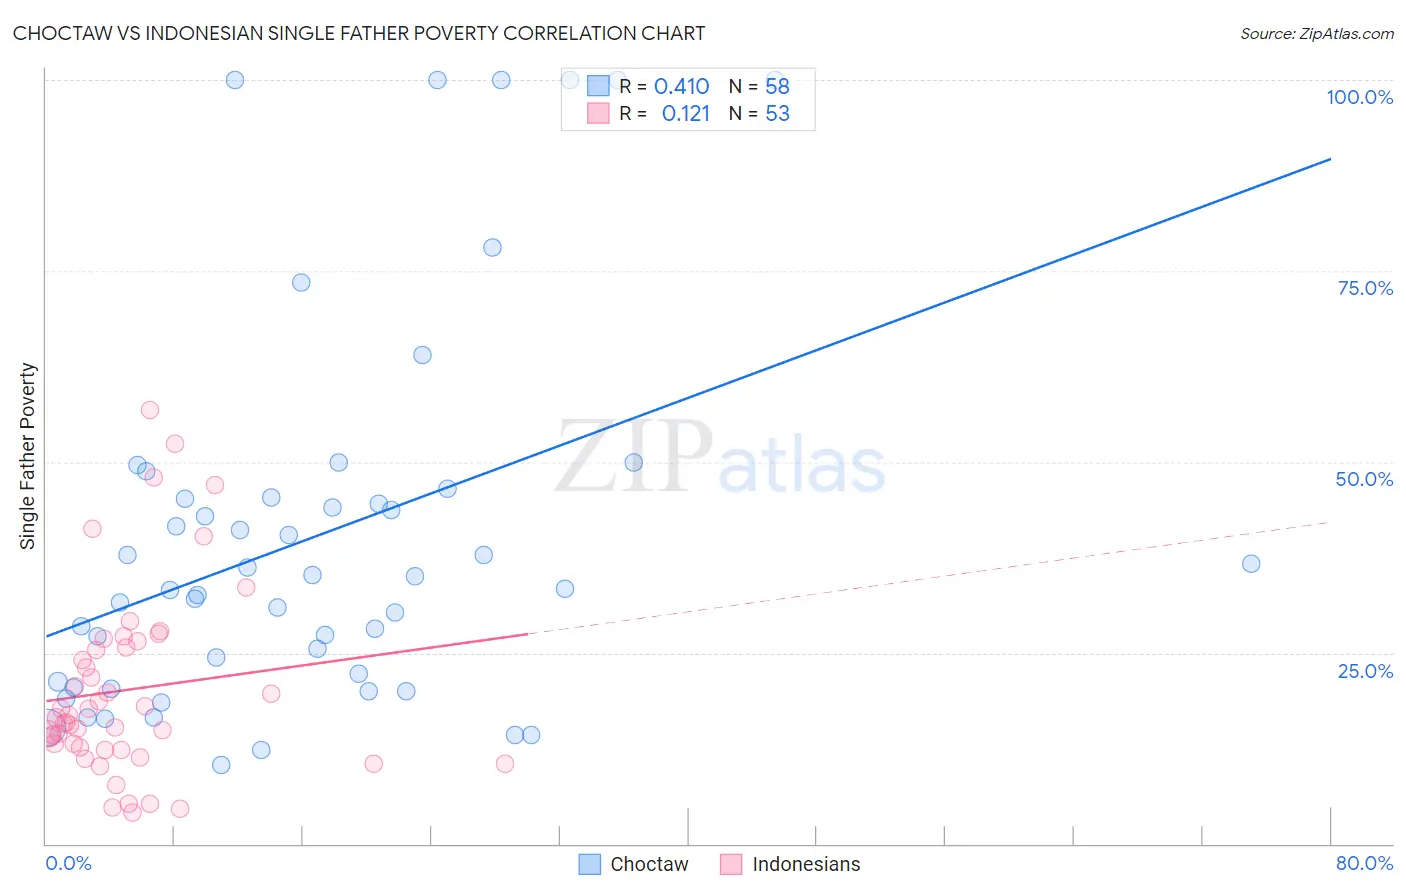 Choctaw vs Indonesian Single Father Poverty